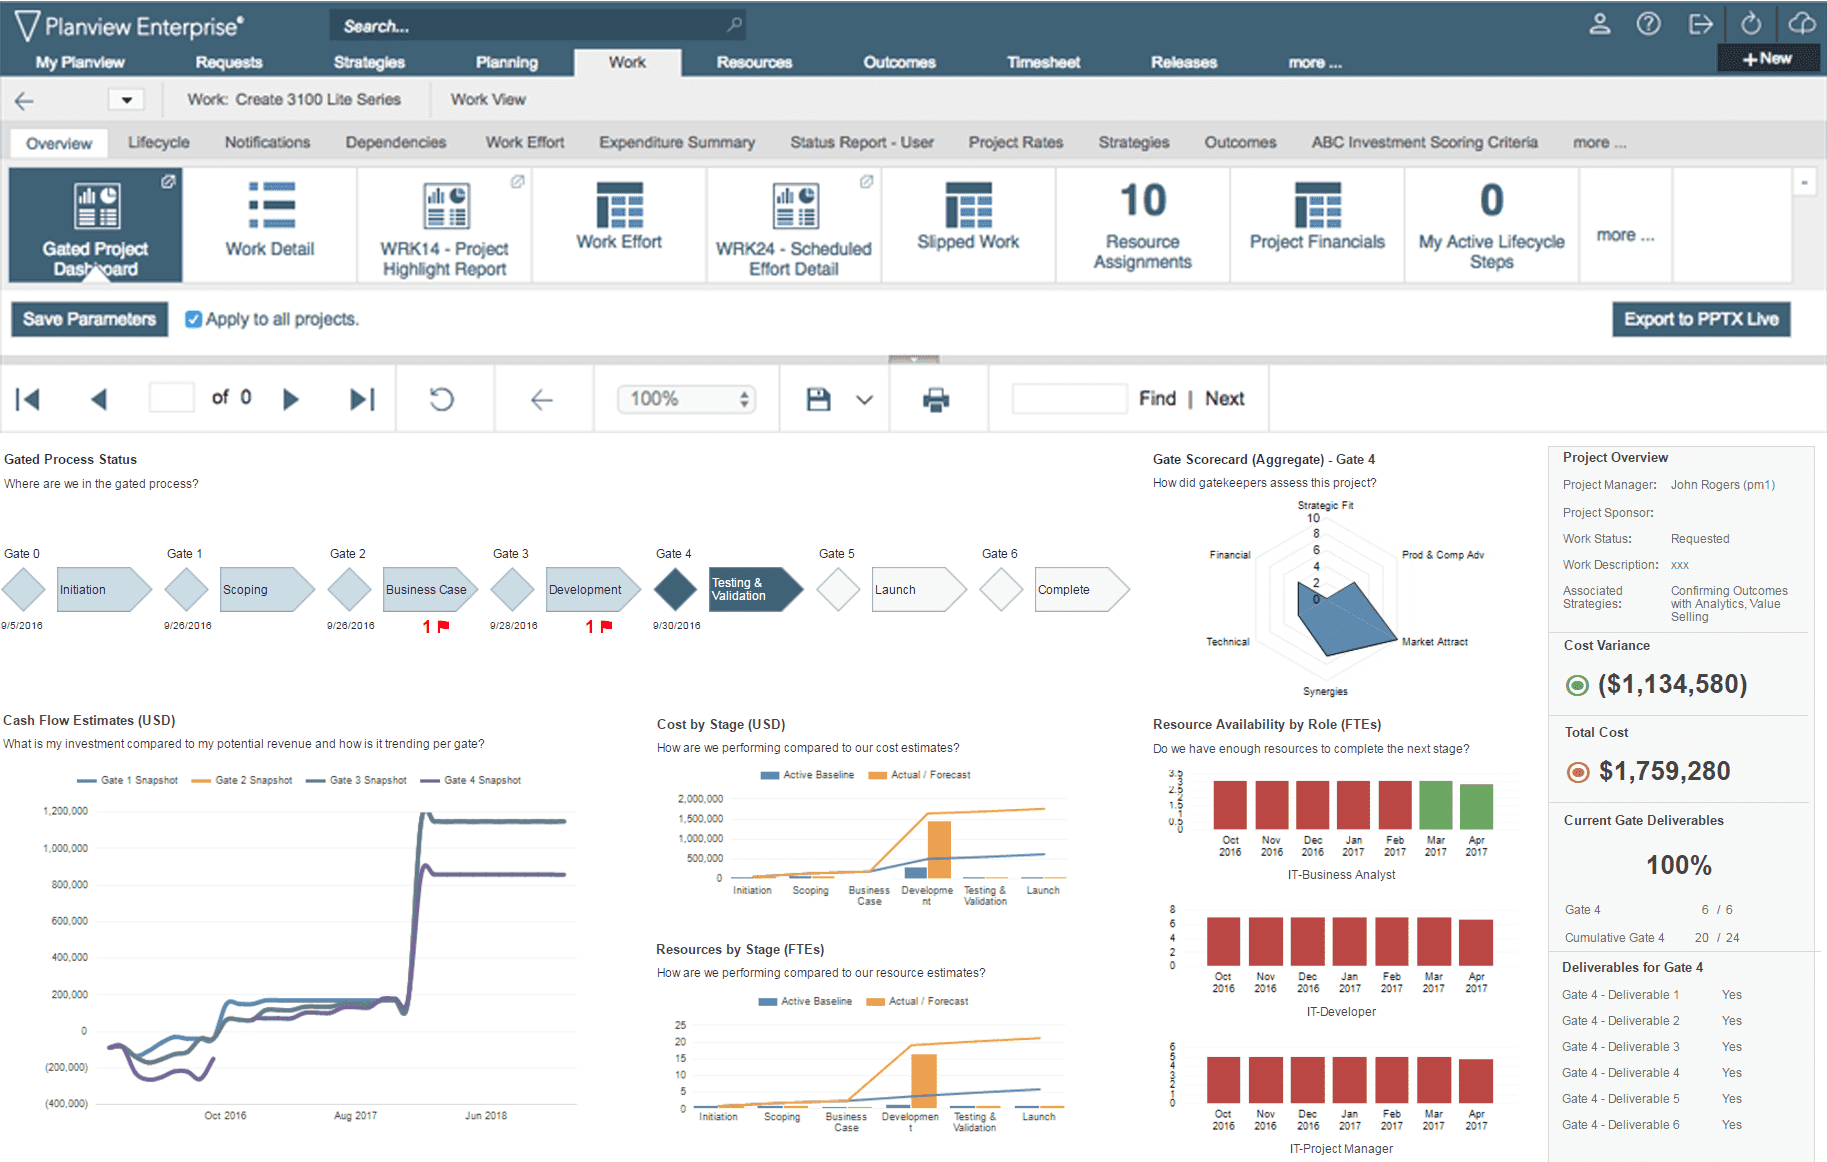 Gated Project DashBoard